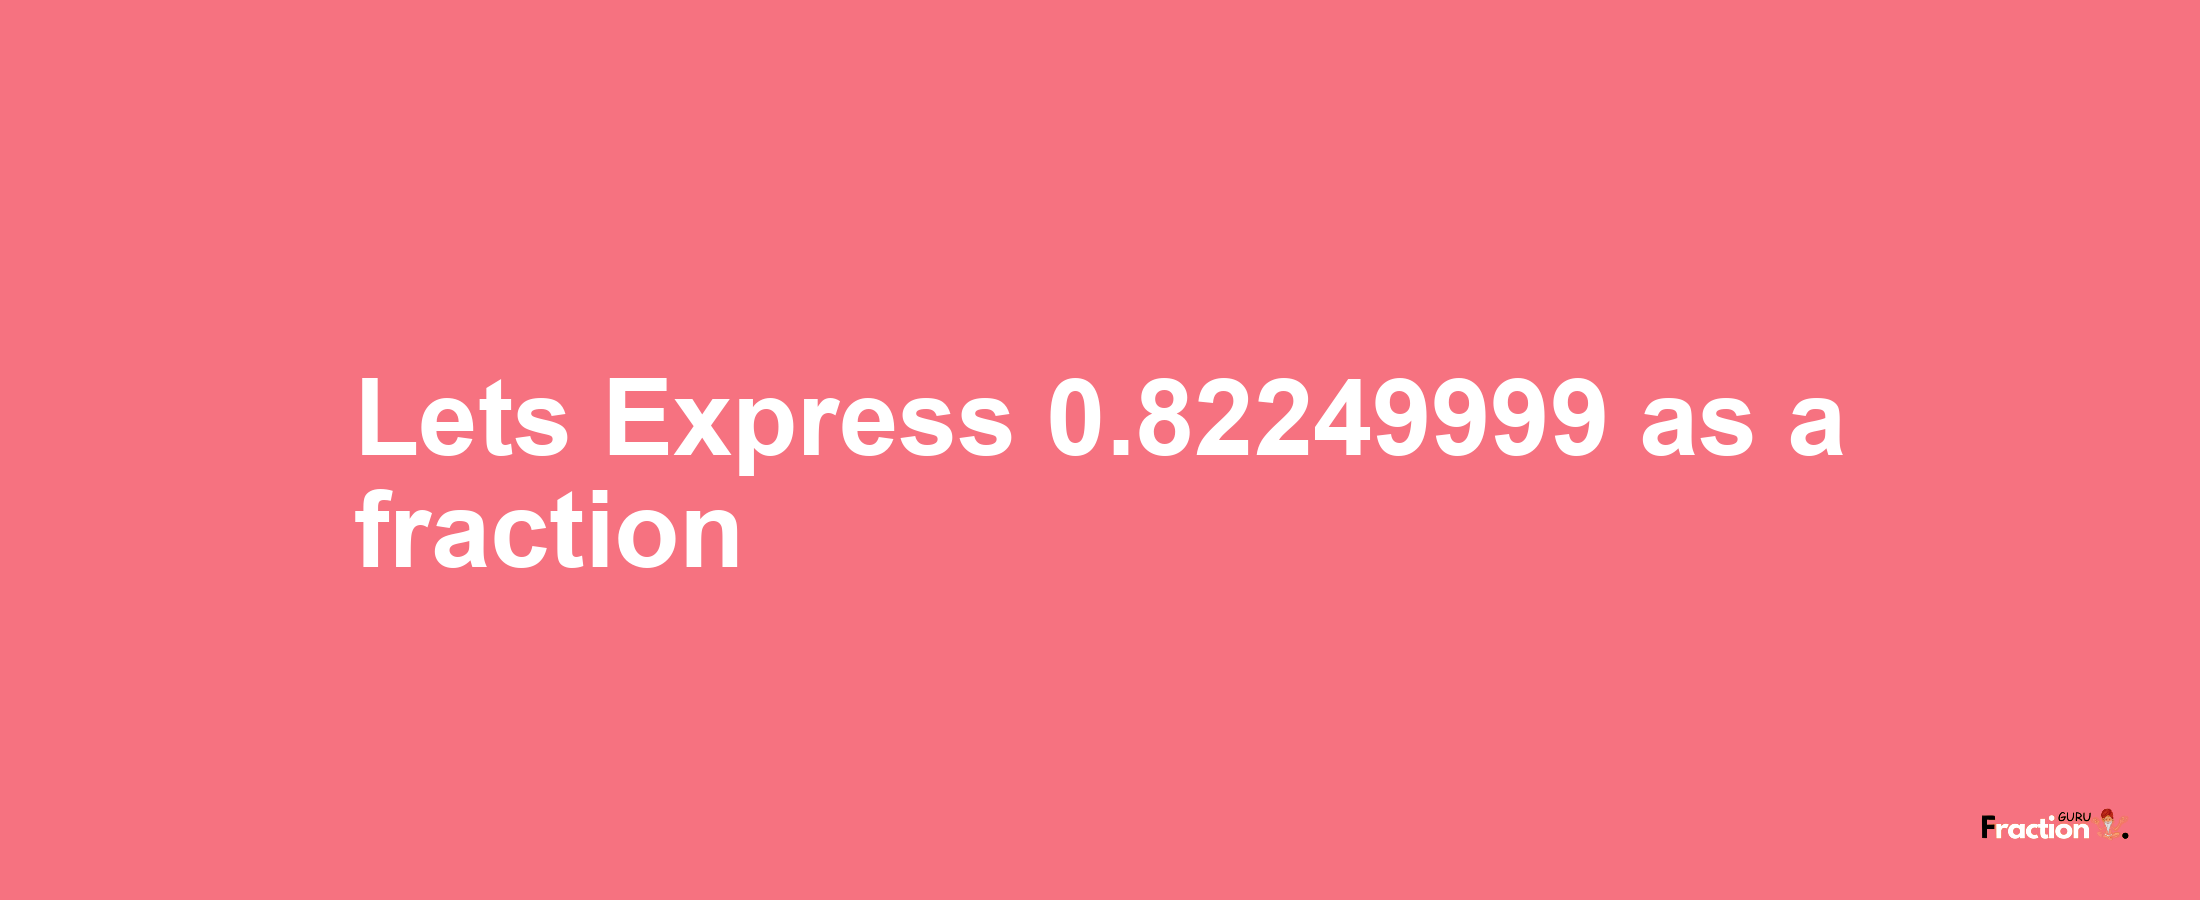 Lets Express 0.82249999 as afraction